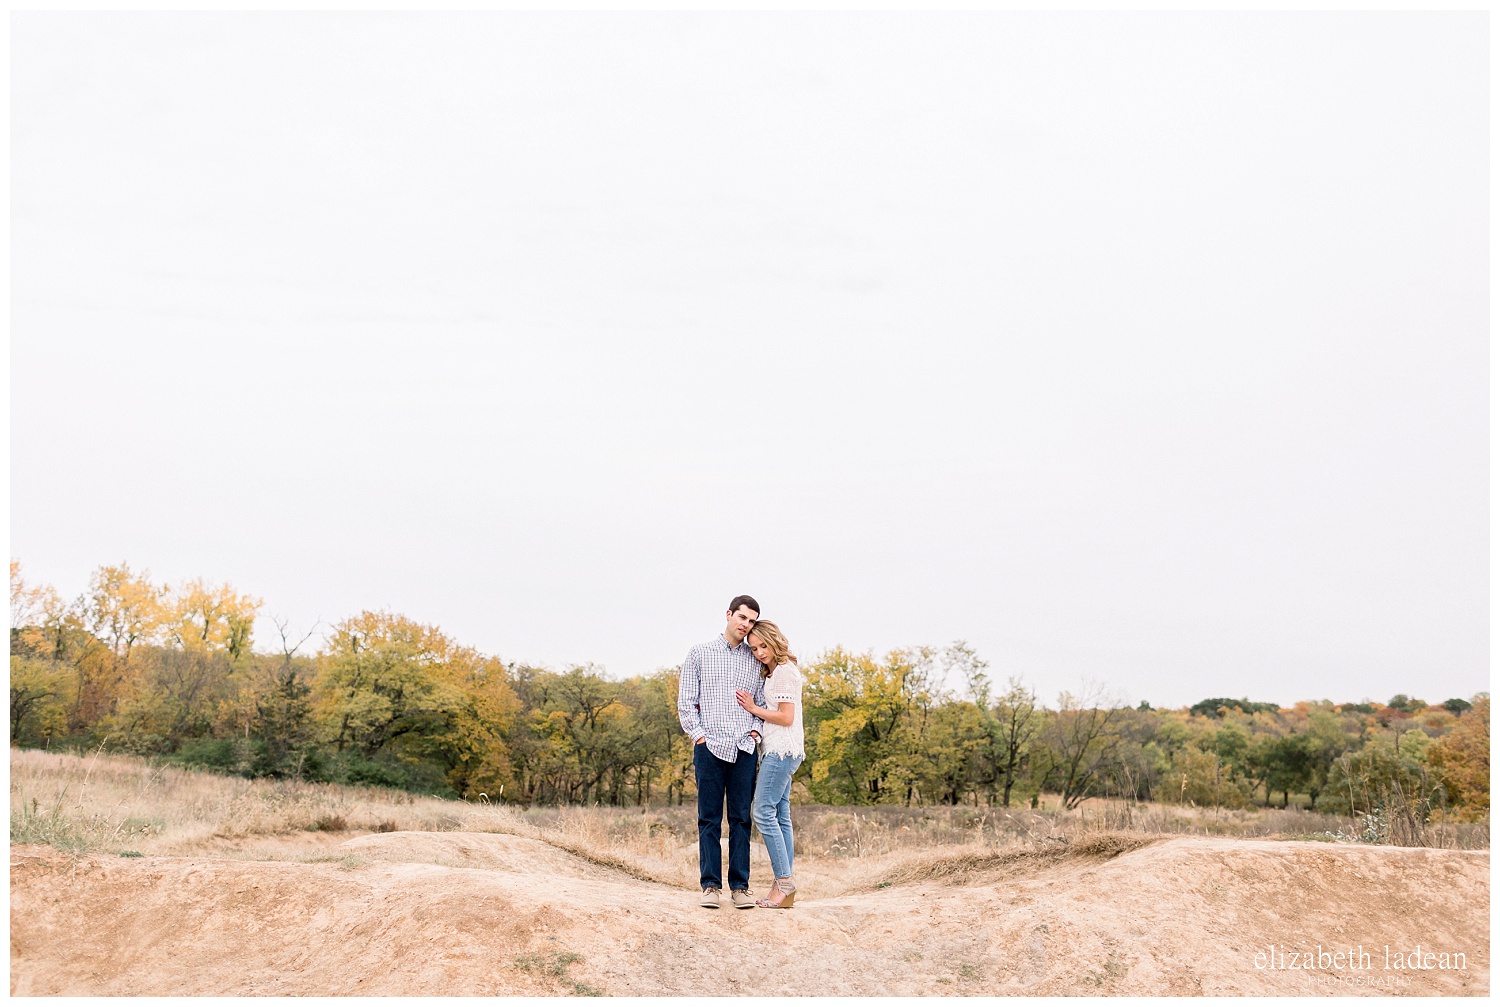 Colorful-Fall-Engagement-Photos-in-KC-C+B-2018-elizabeth-ladean-photography-photo_1791.jpg